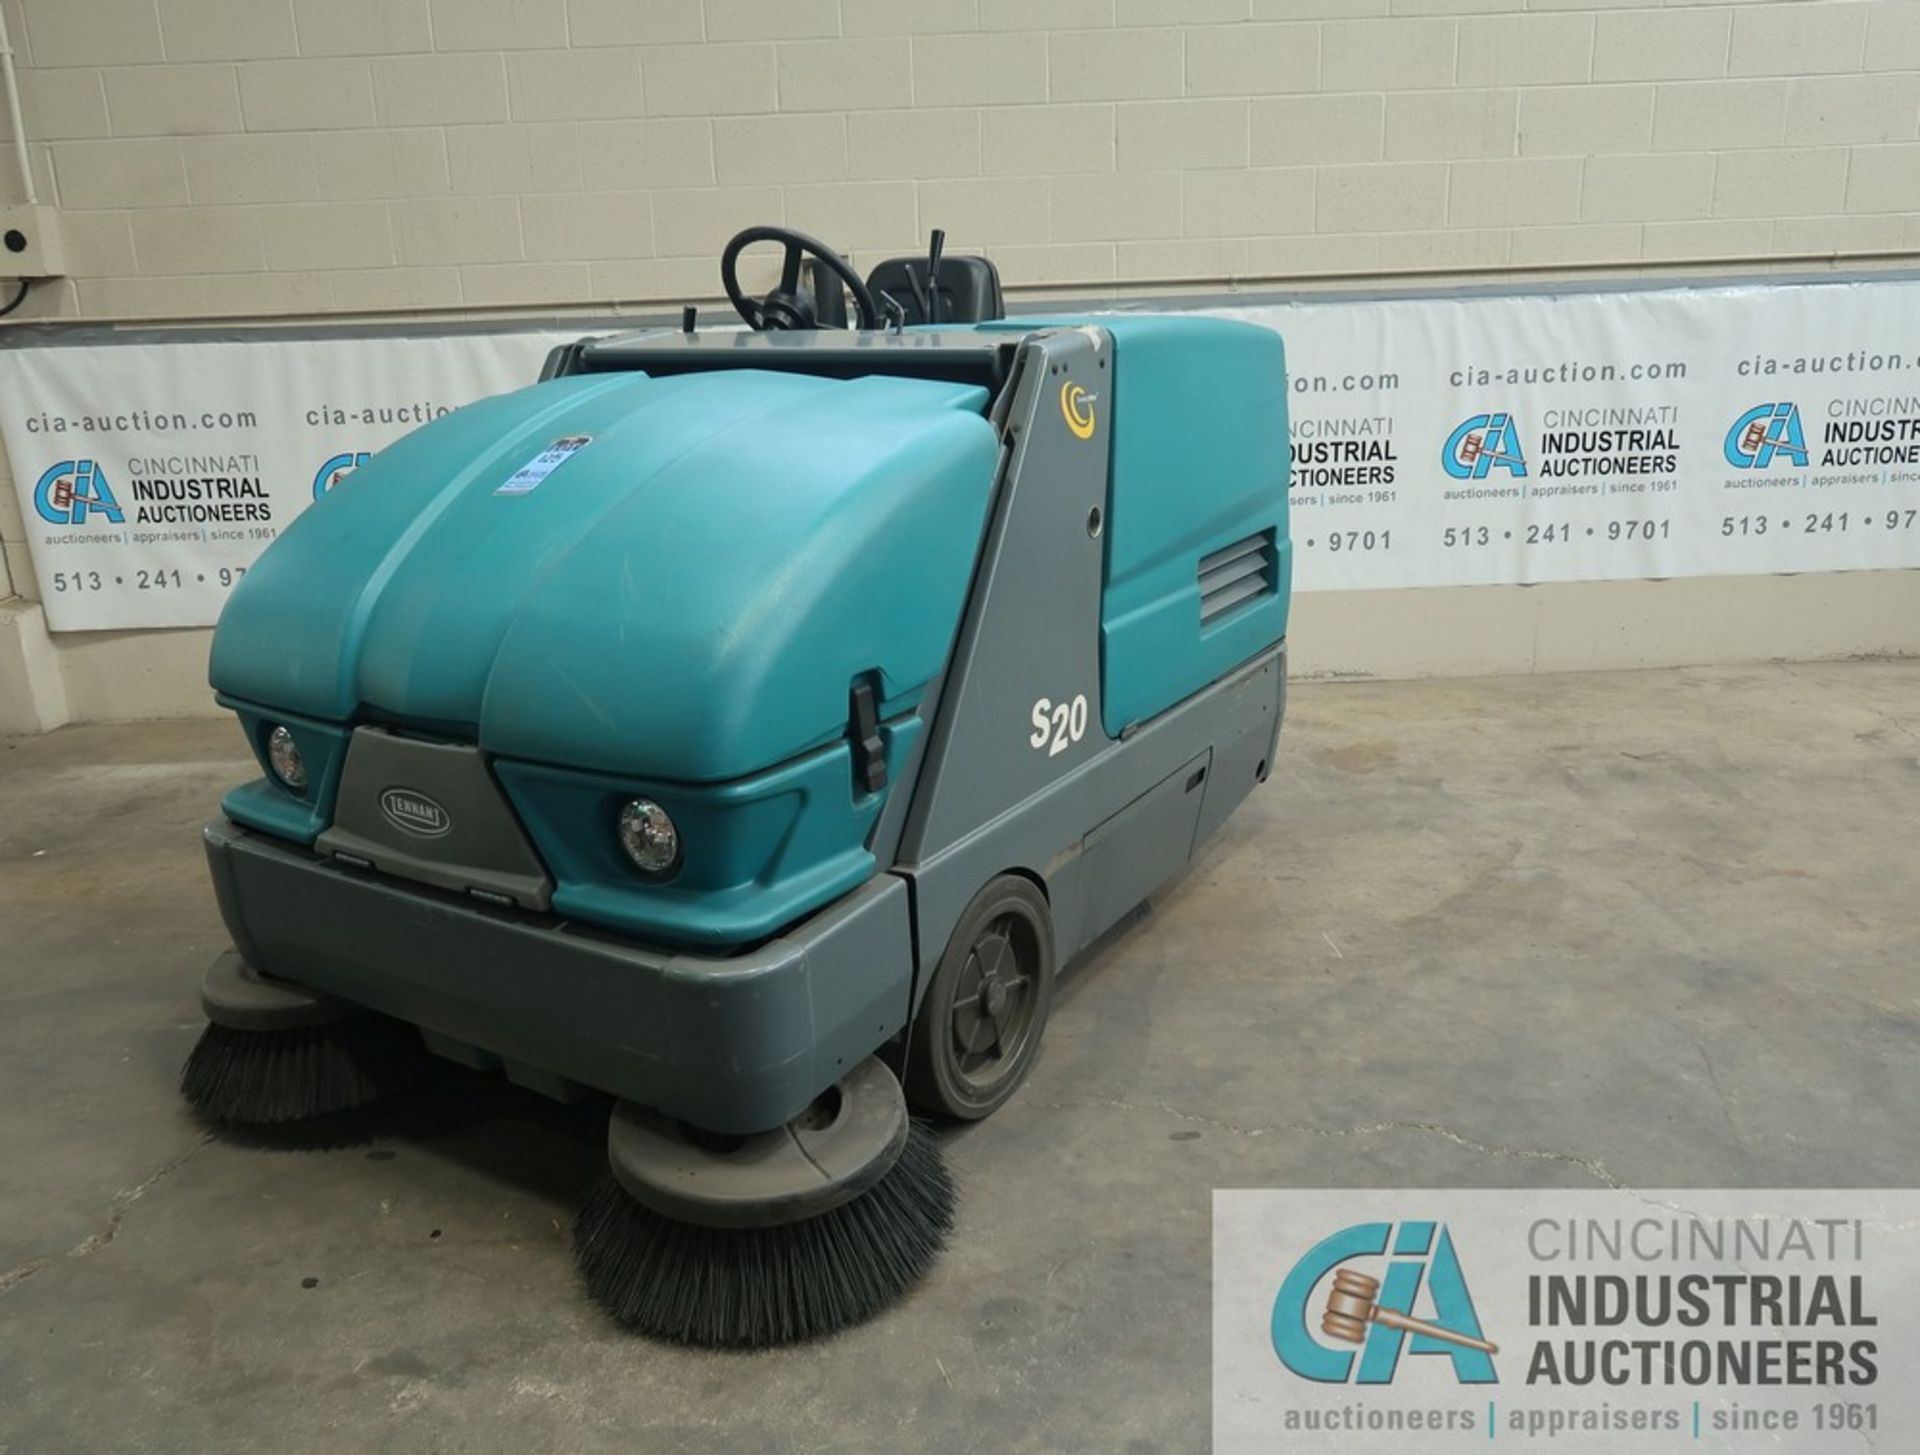 2017 TENNANT MODEL S20 RIDER TYPE FLOOR SCRUBBER; S/N S20-5620, 70 HOURS SHOWING